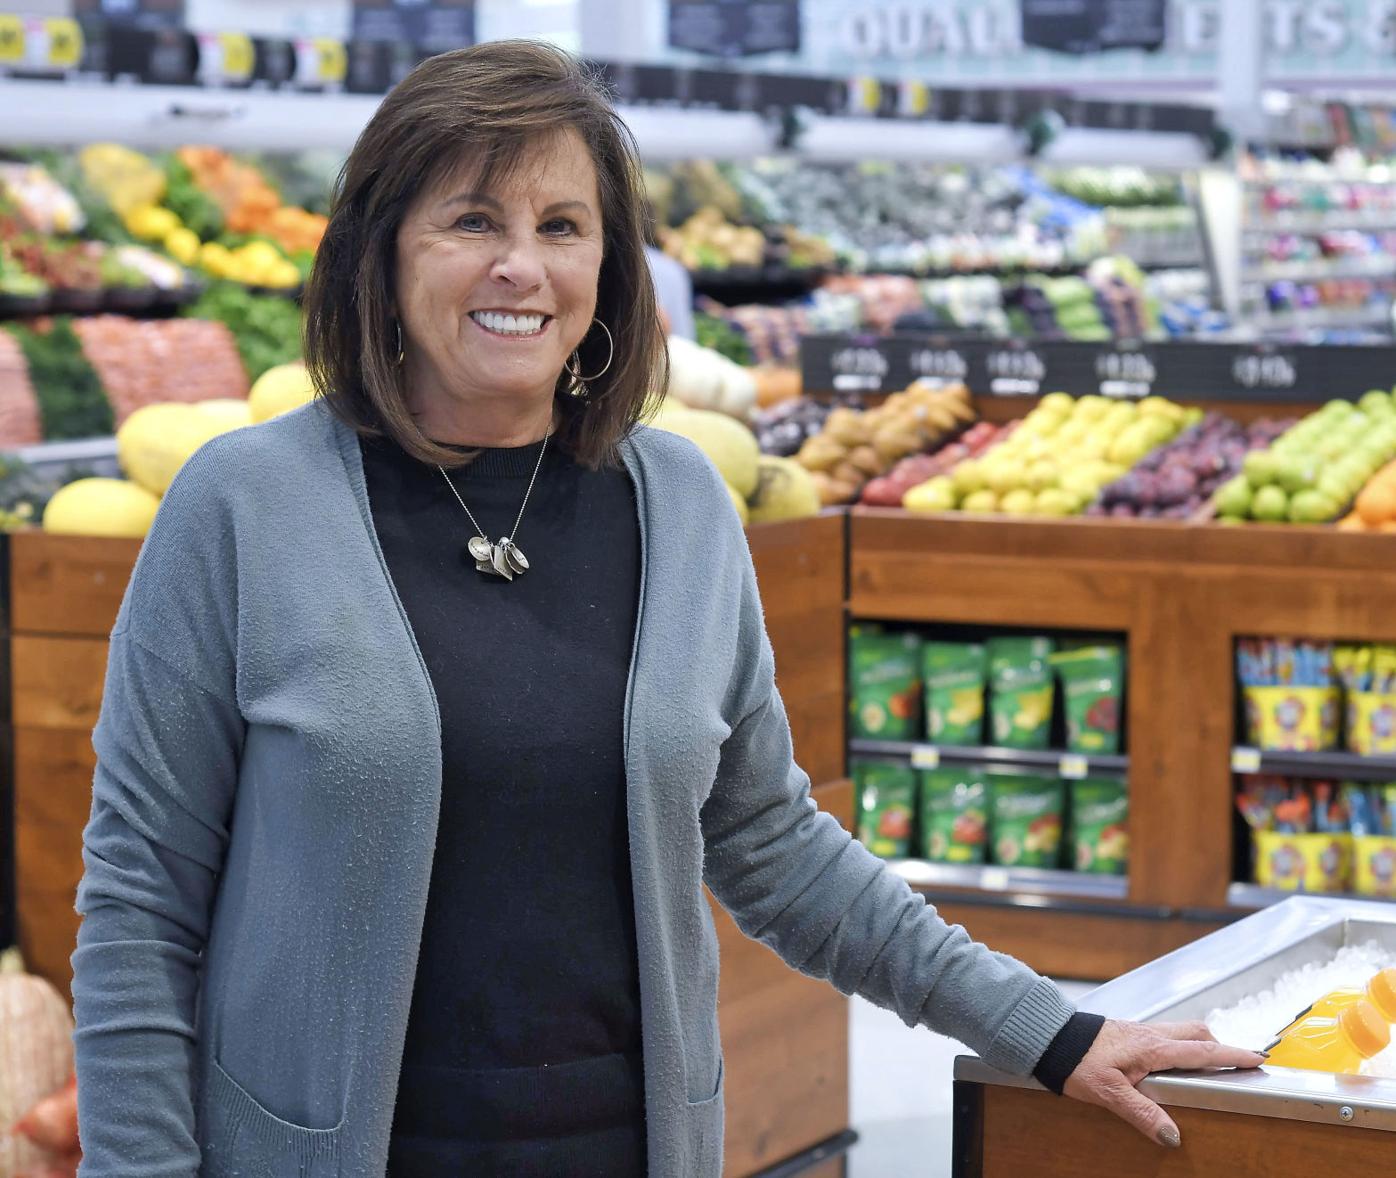 Shari, Jon Badger talk Lee's Marketplace expansion in recent years |  Business 